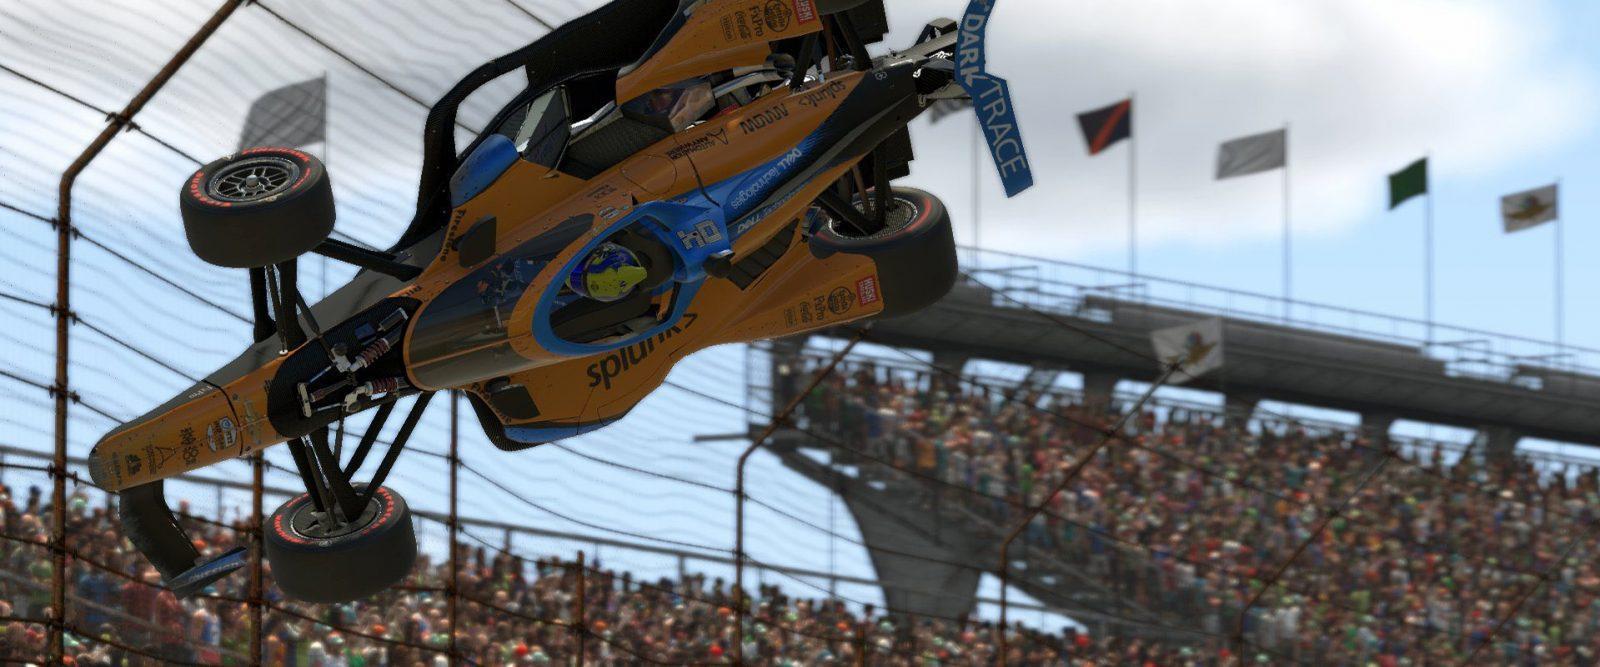 Finale of IndyCar iRacing Challenge turns into crash fest